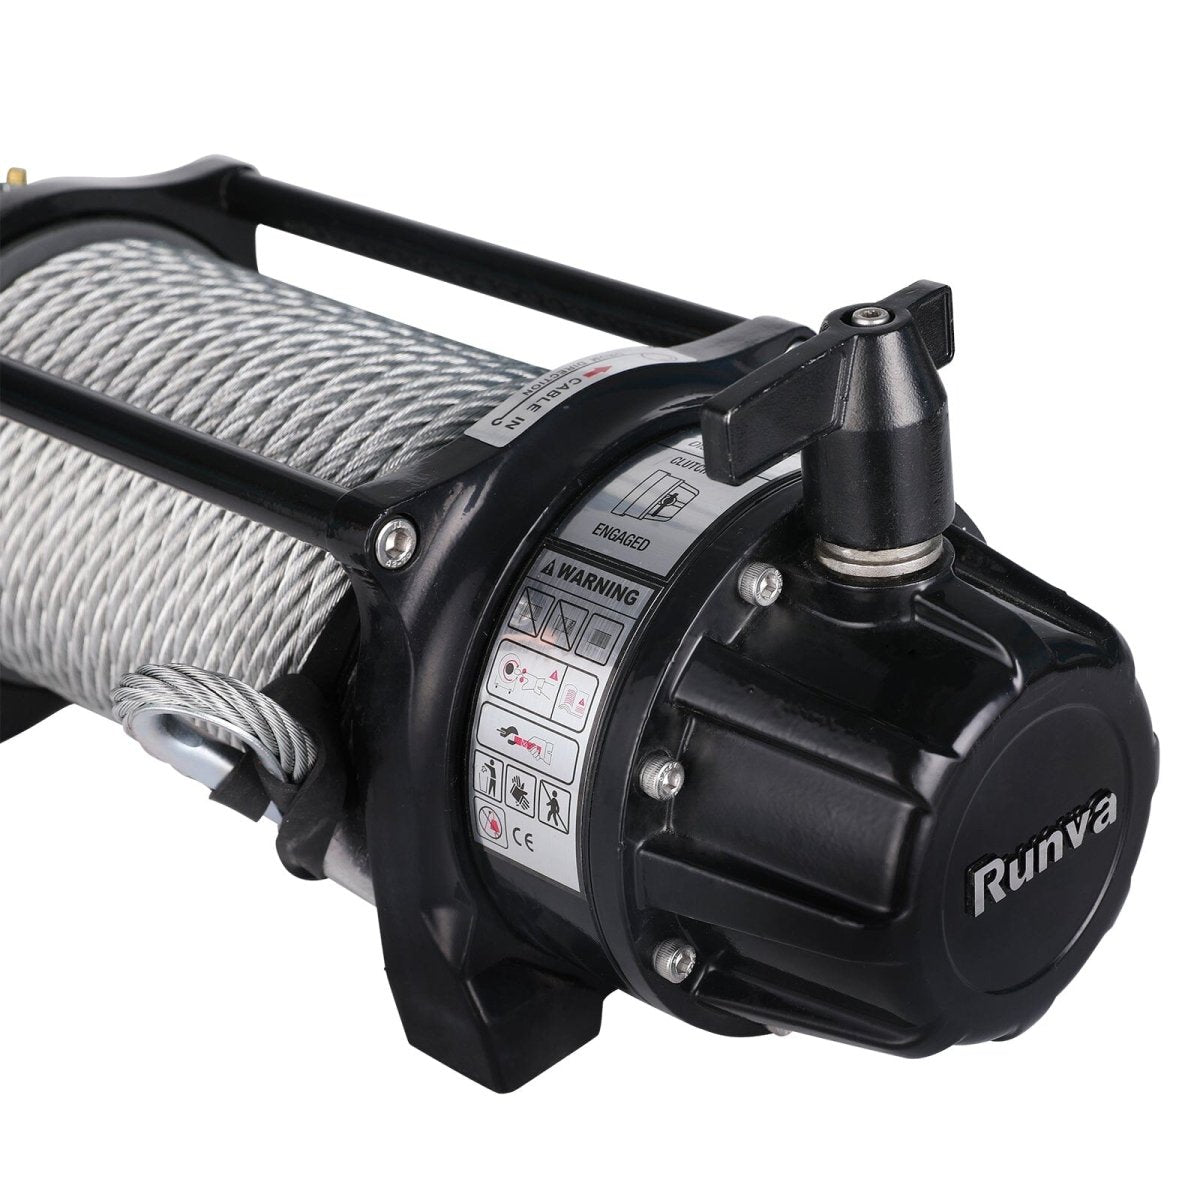 Runva 13XP Premium Winch with Steel Cable - NZ Offroader